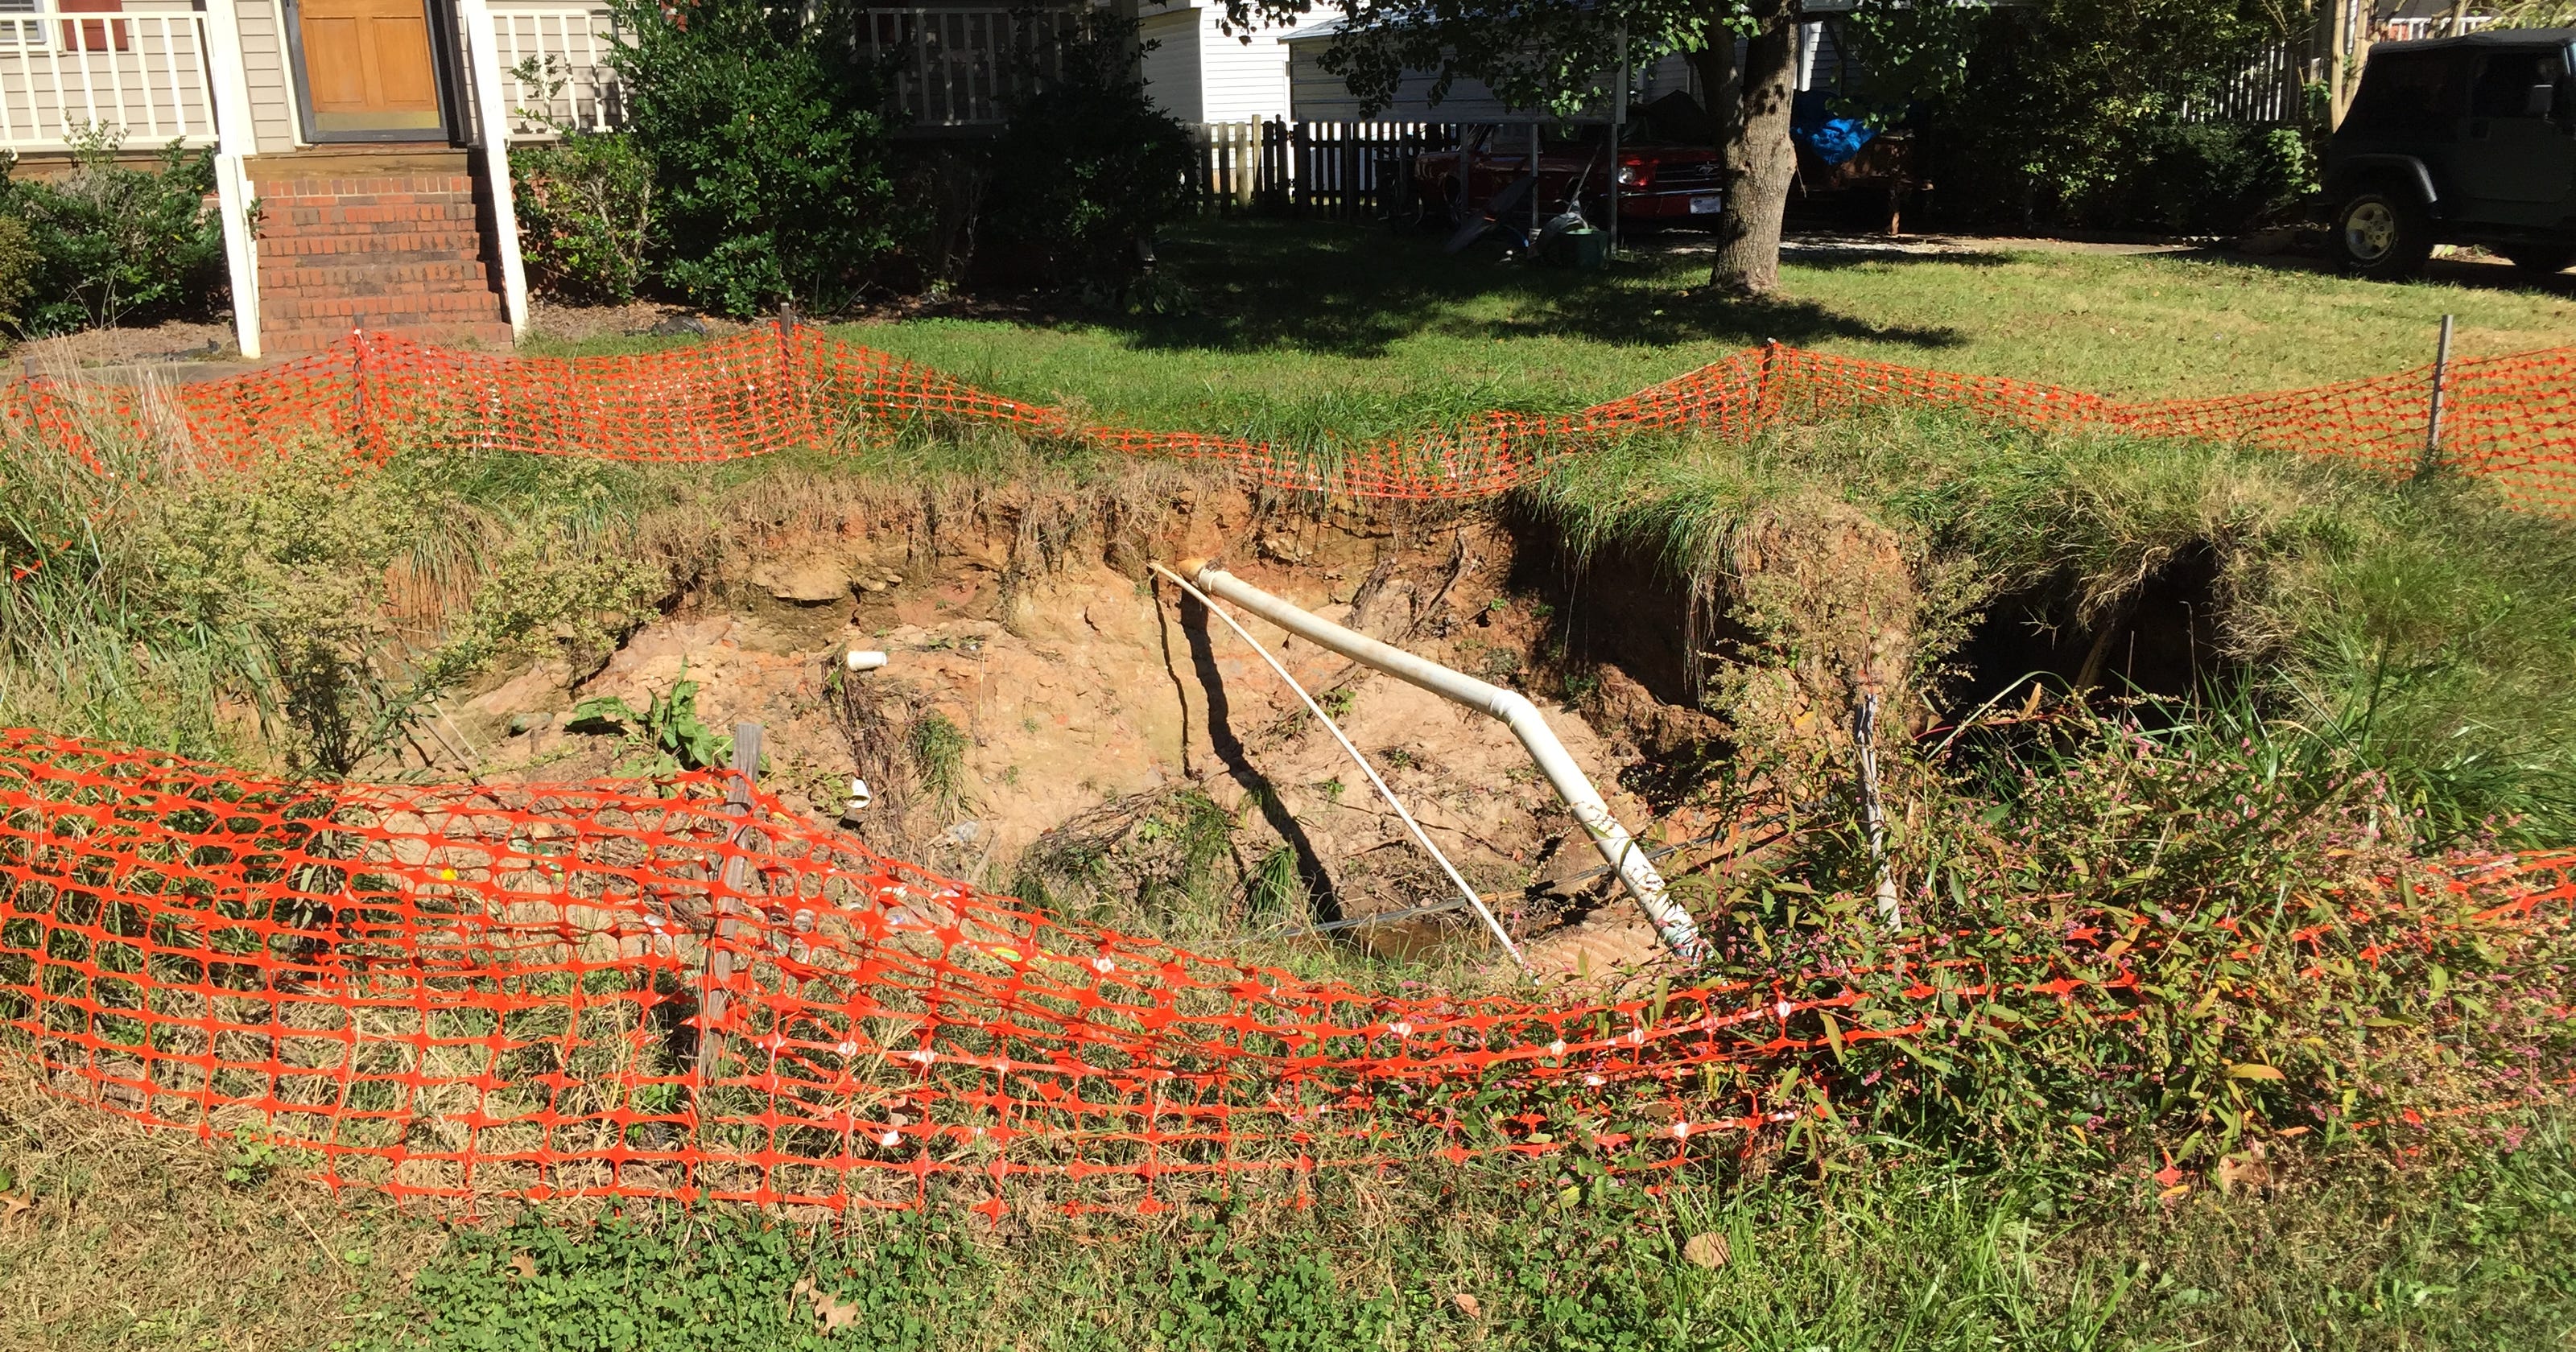 Easley Homeowners File Federal Suit Over Sinkholes